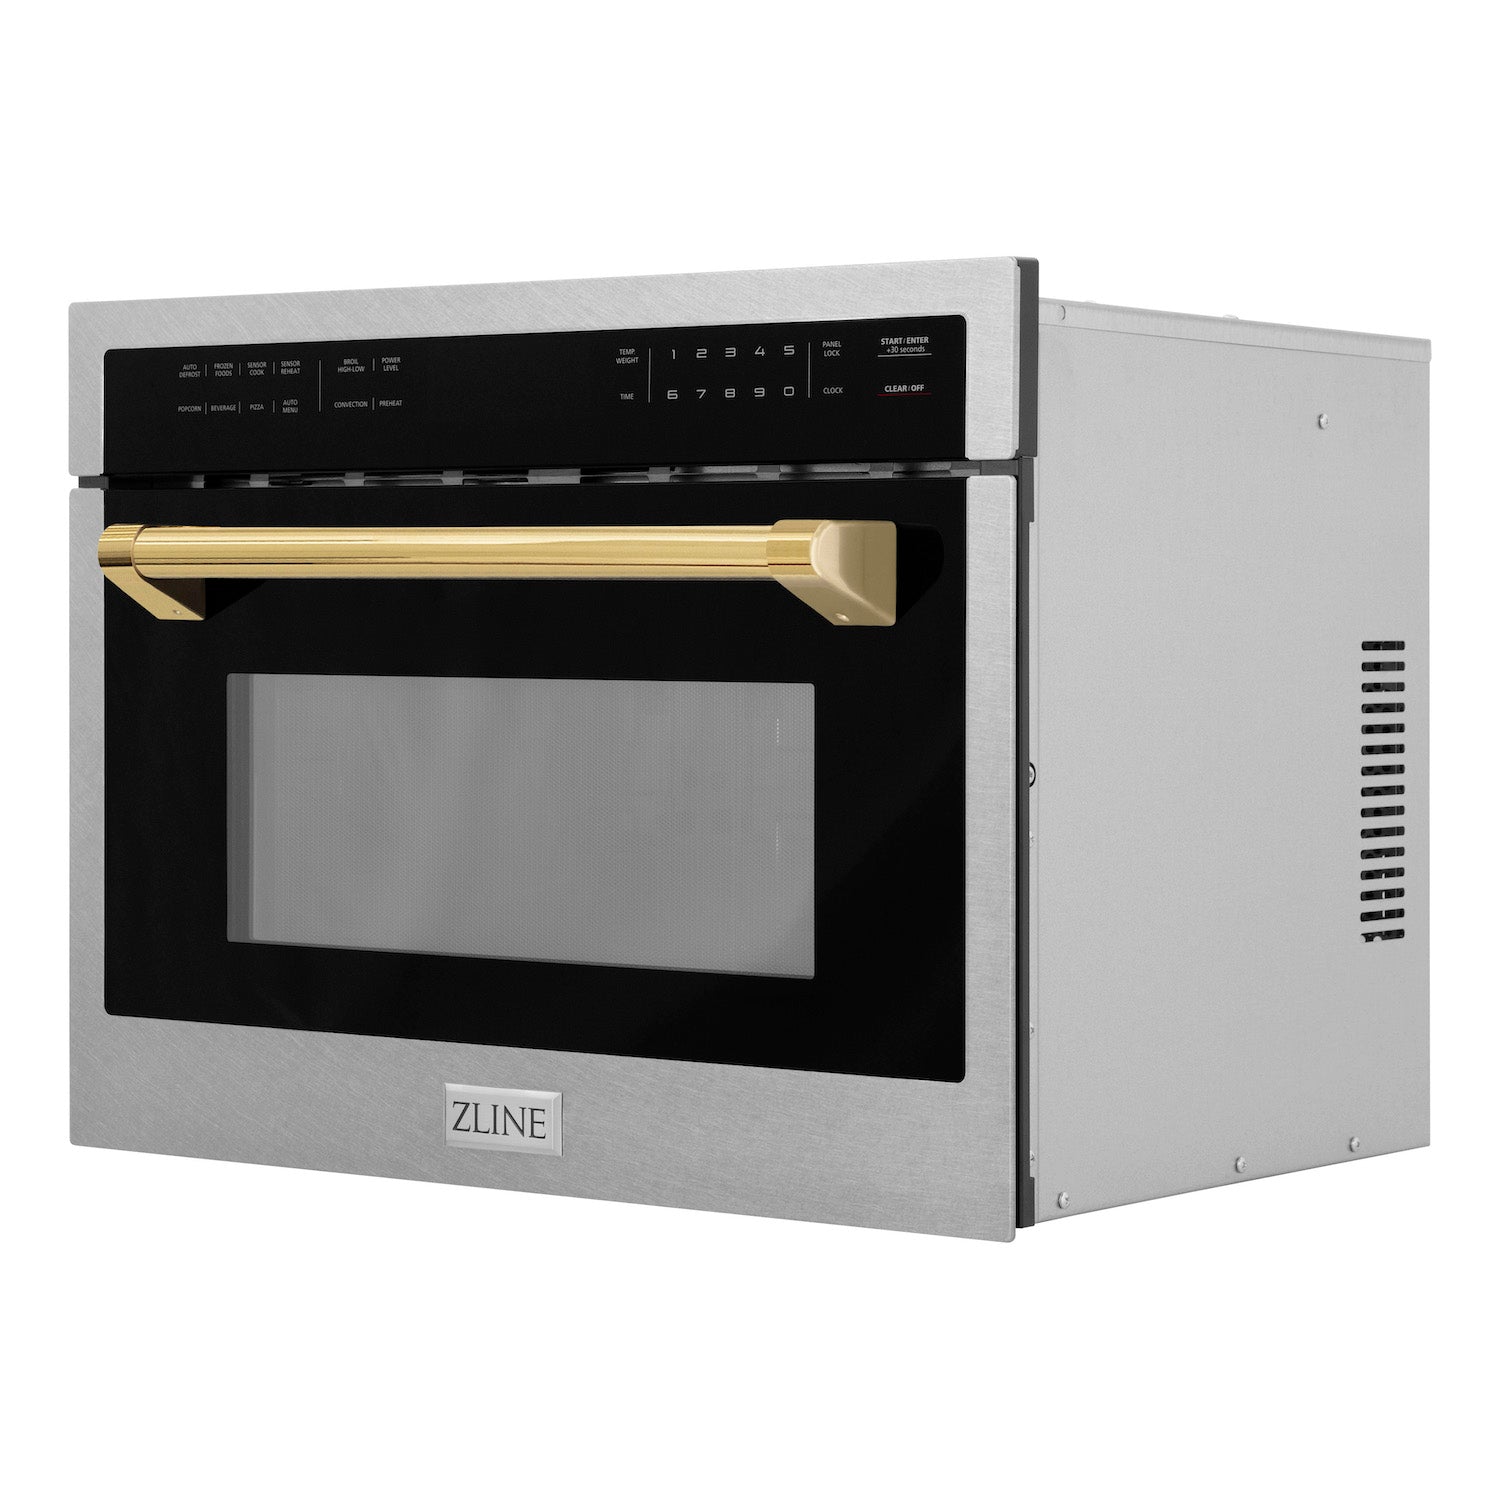 ZLINE Autograph Edition 24 in. 1.6 cu ft. Built-in Convection Microwave Oven in DuraSnow Stainless Steel with Polished Gold Accents side with door closed.